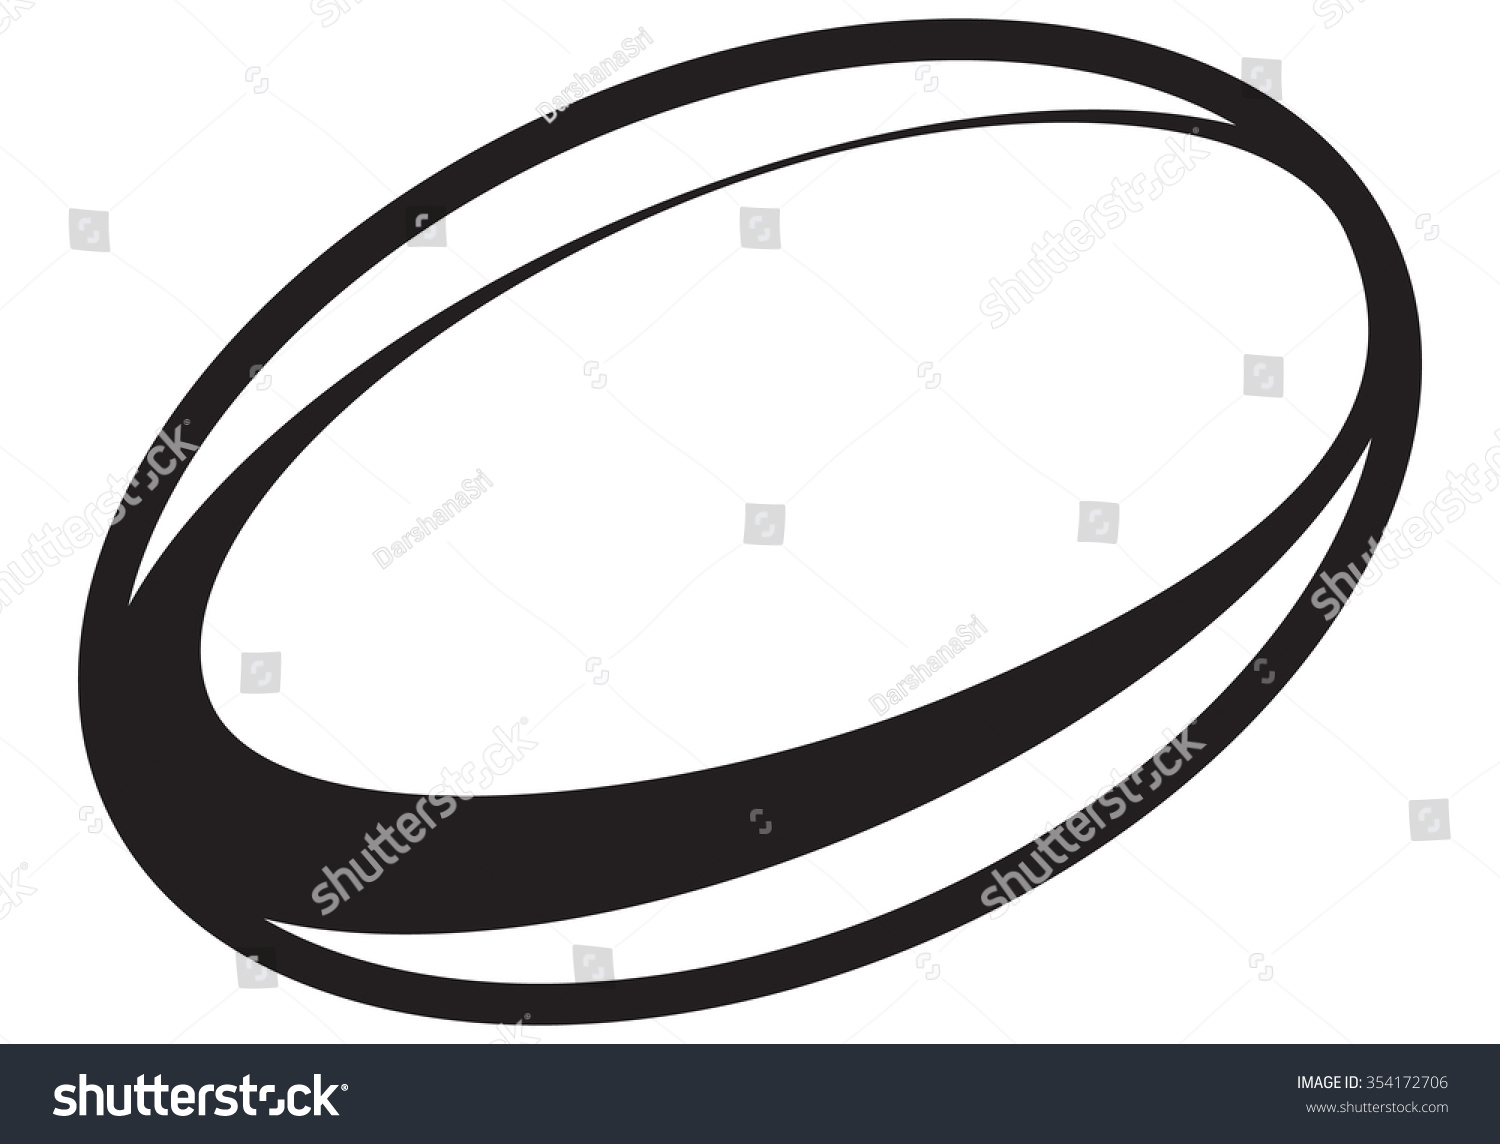 clipart rugby ball - photo #14